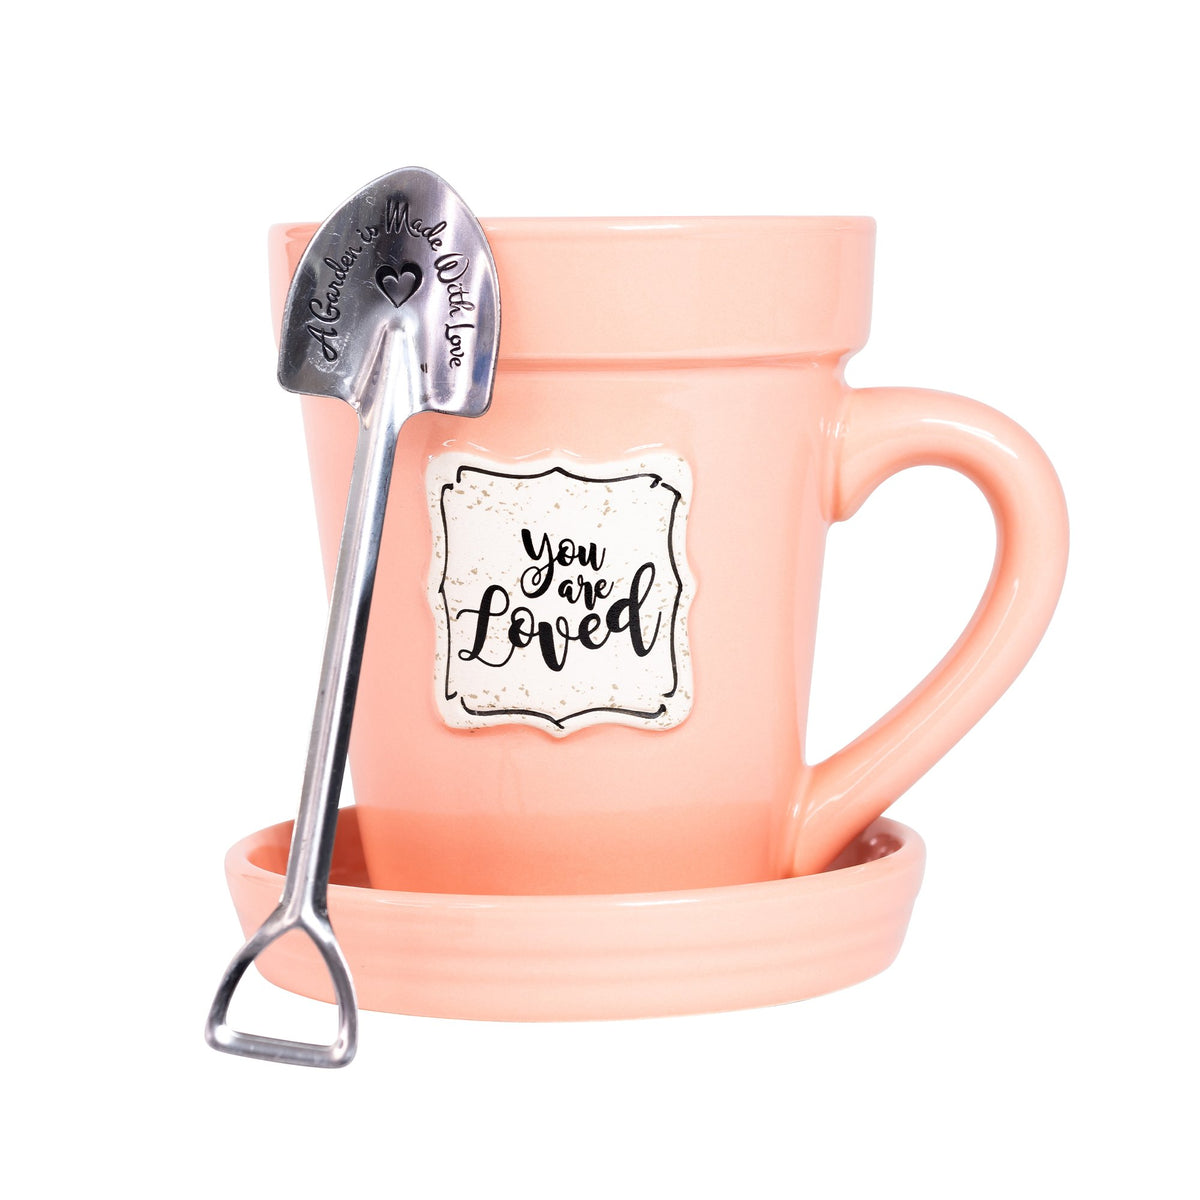 A Peach Flower Pot Mug - You Are Loved from Nicole Brayden with a spoon in it.